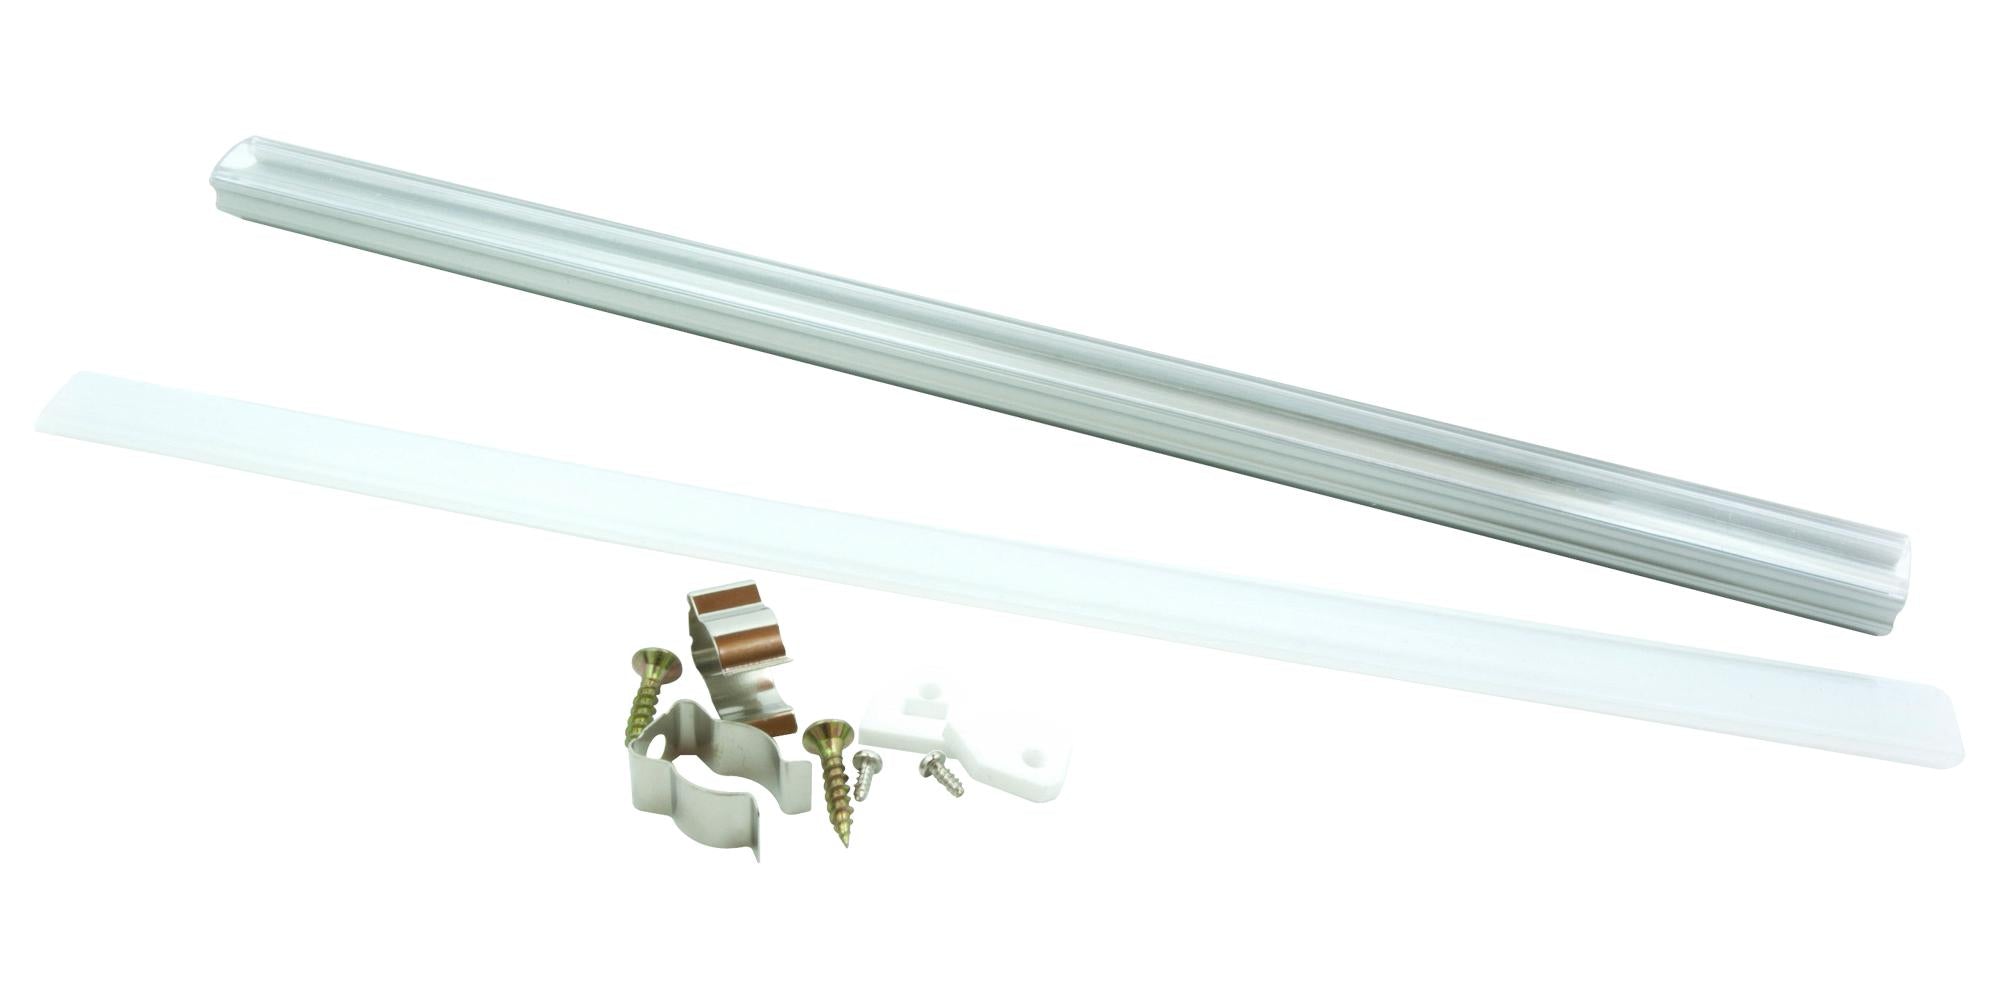 ILK-FLEXEXT-1500-002. KIT, LED STRIP, ANGLED EXTRUSION, 1.5M INTELLIGENT LED SOLUTIONS